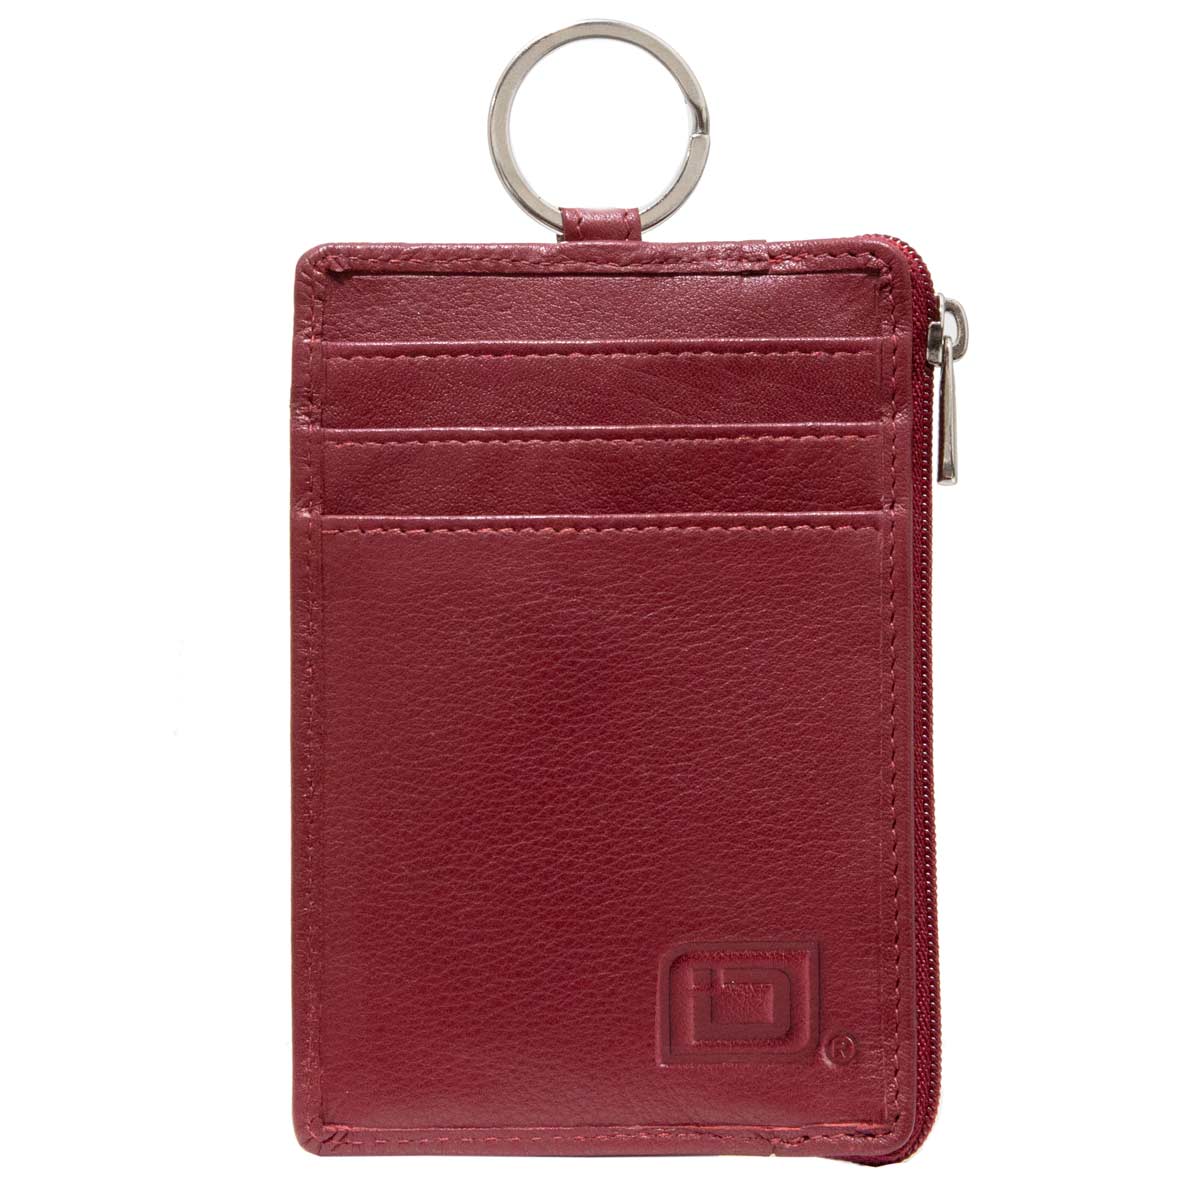 Designer Leather Coin Pouch Keychain With 3 Styles Unisex Fashion